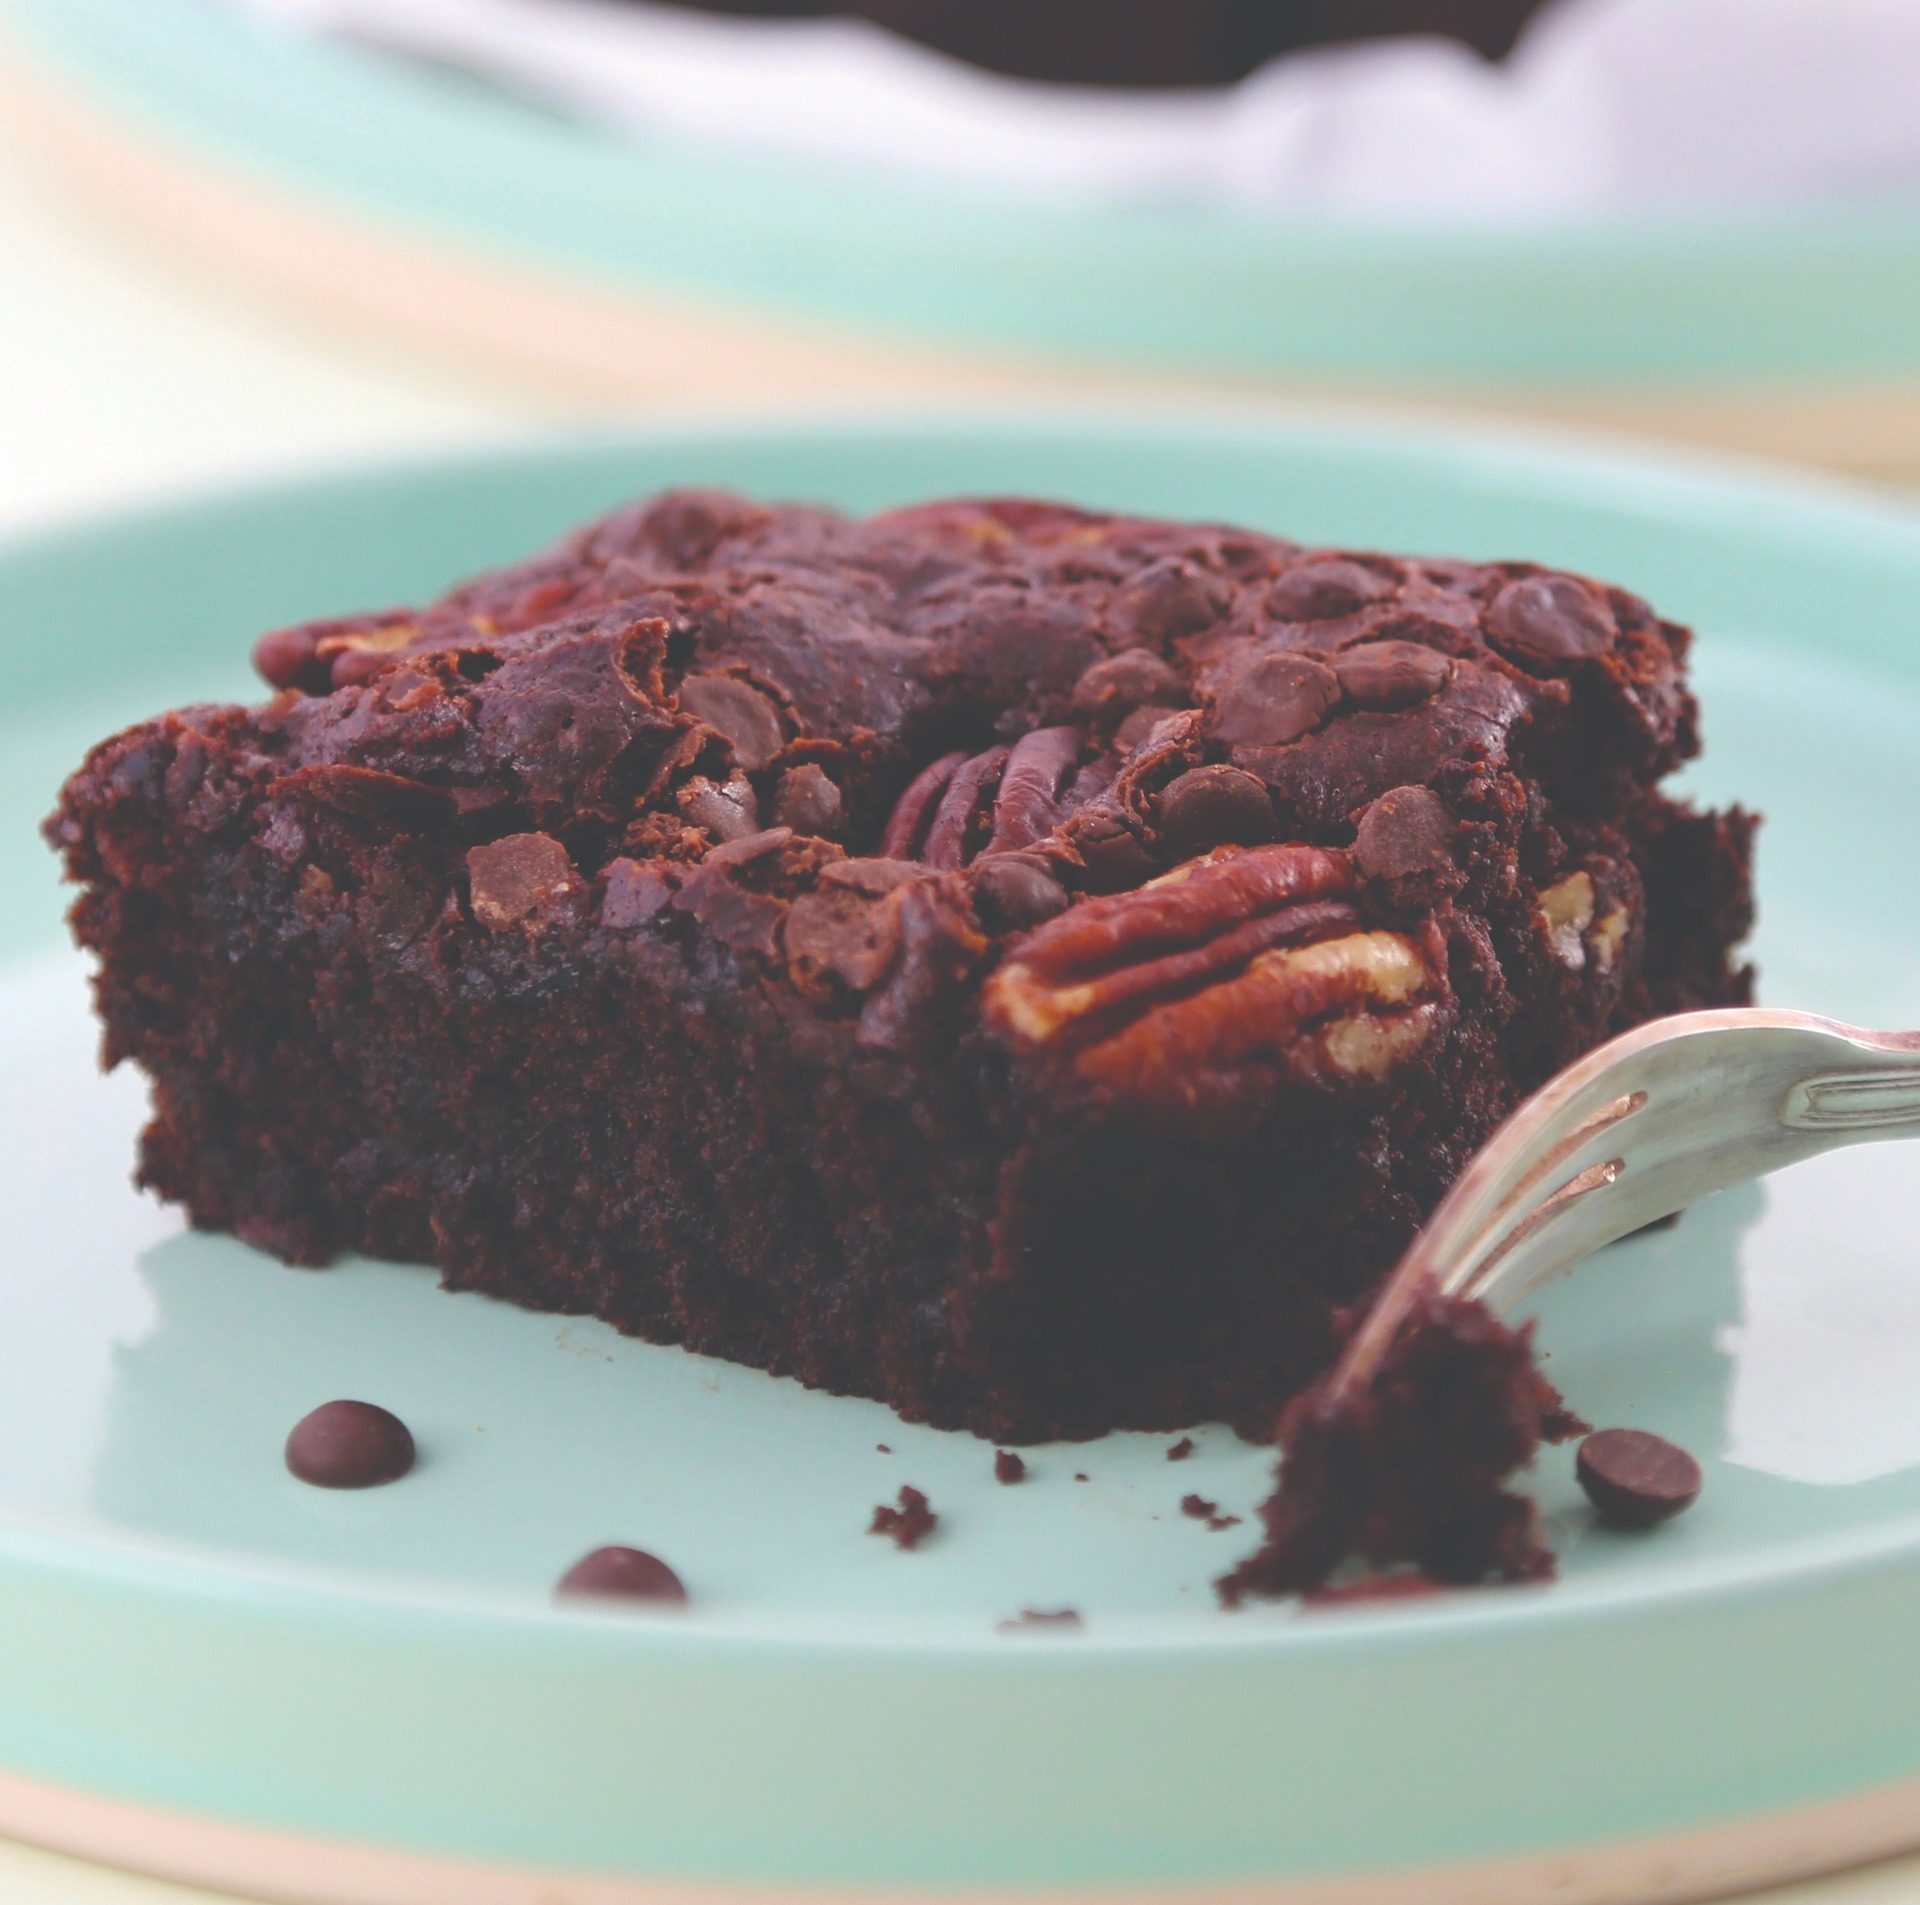 Gluten-free vegan brownie on teal plate with silver fork